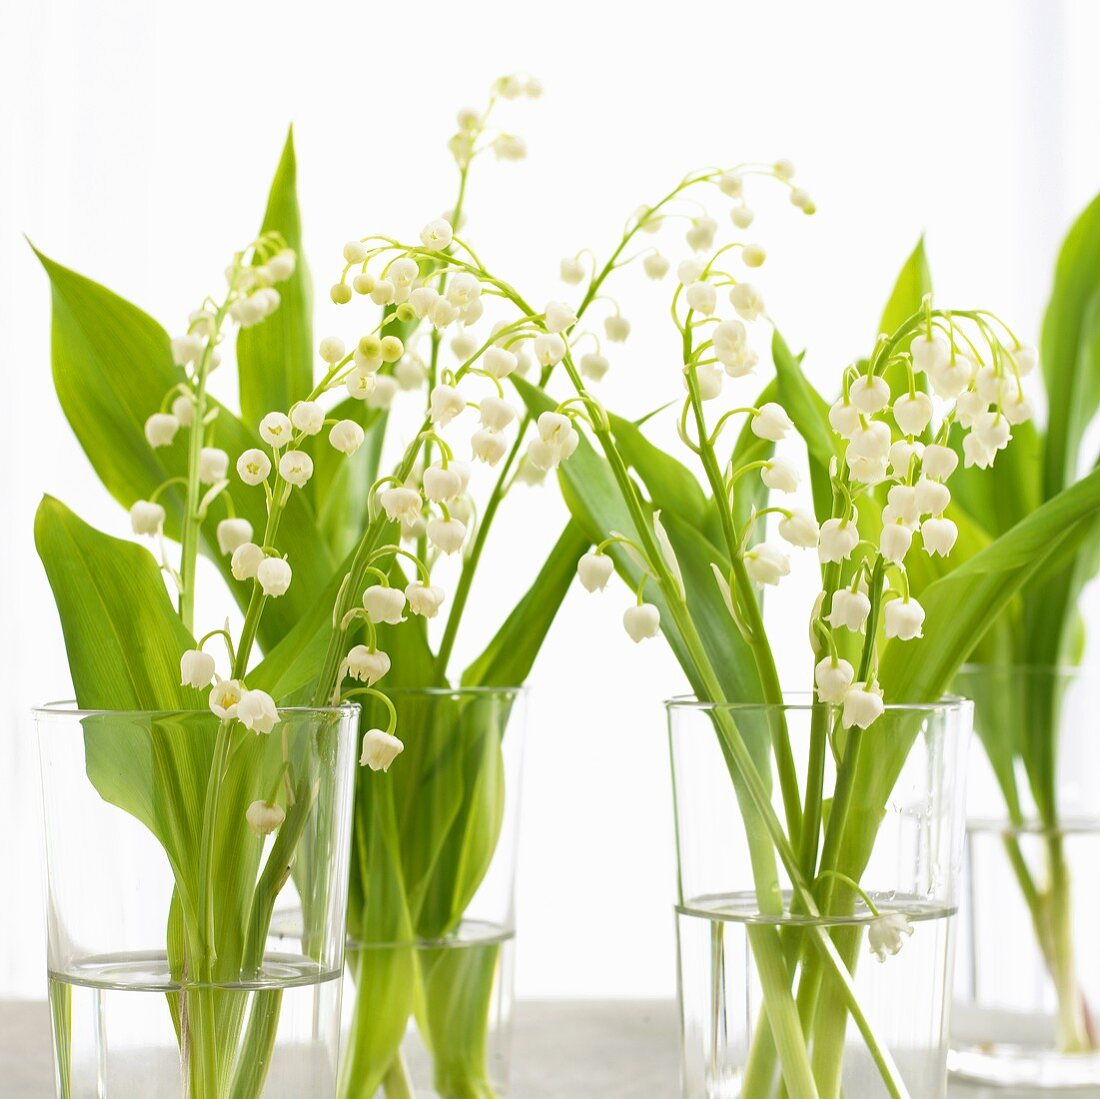 Lilies of the valley in glasses of water